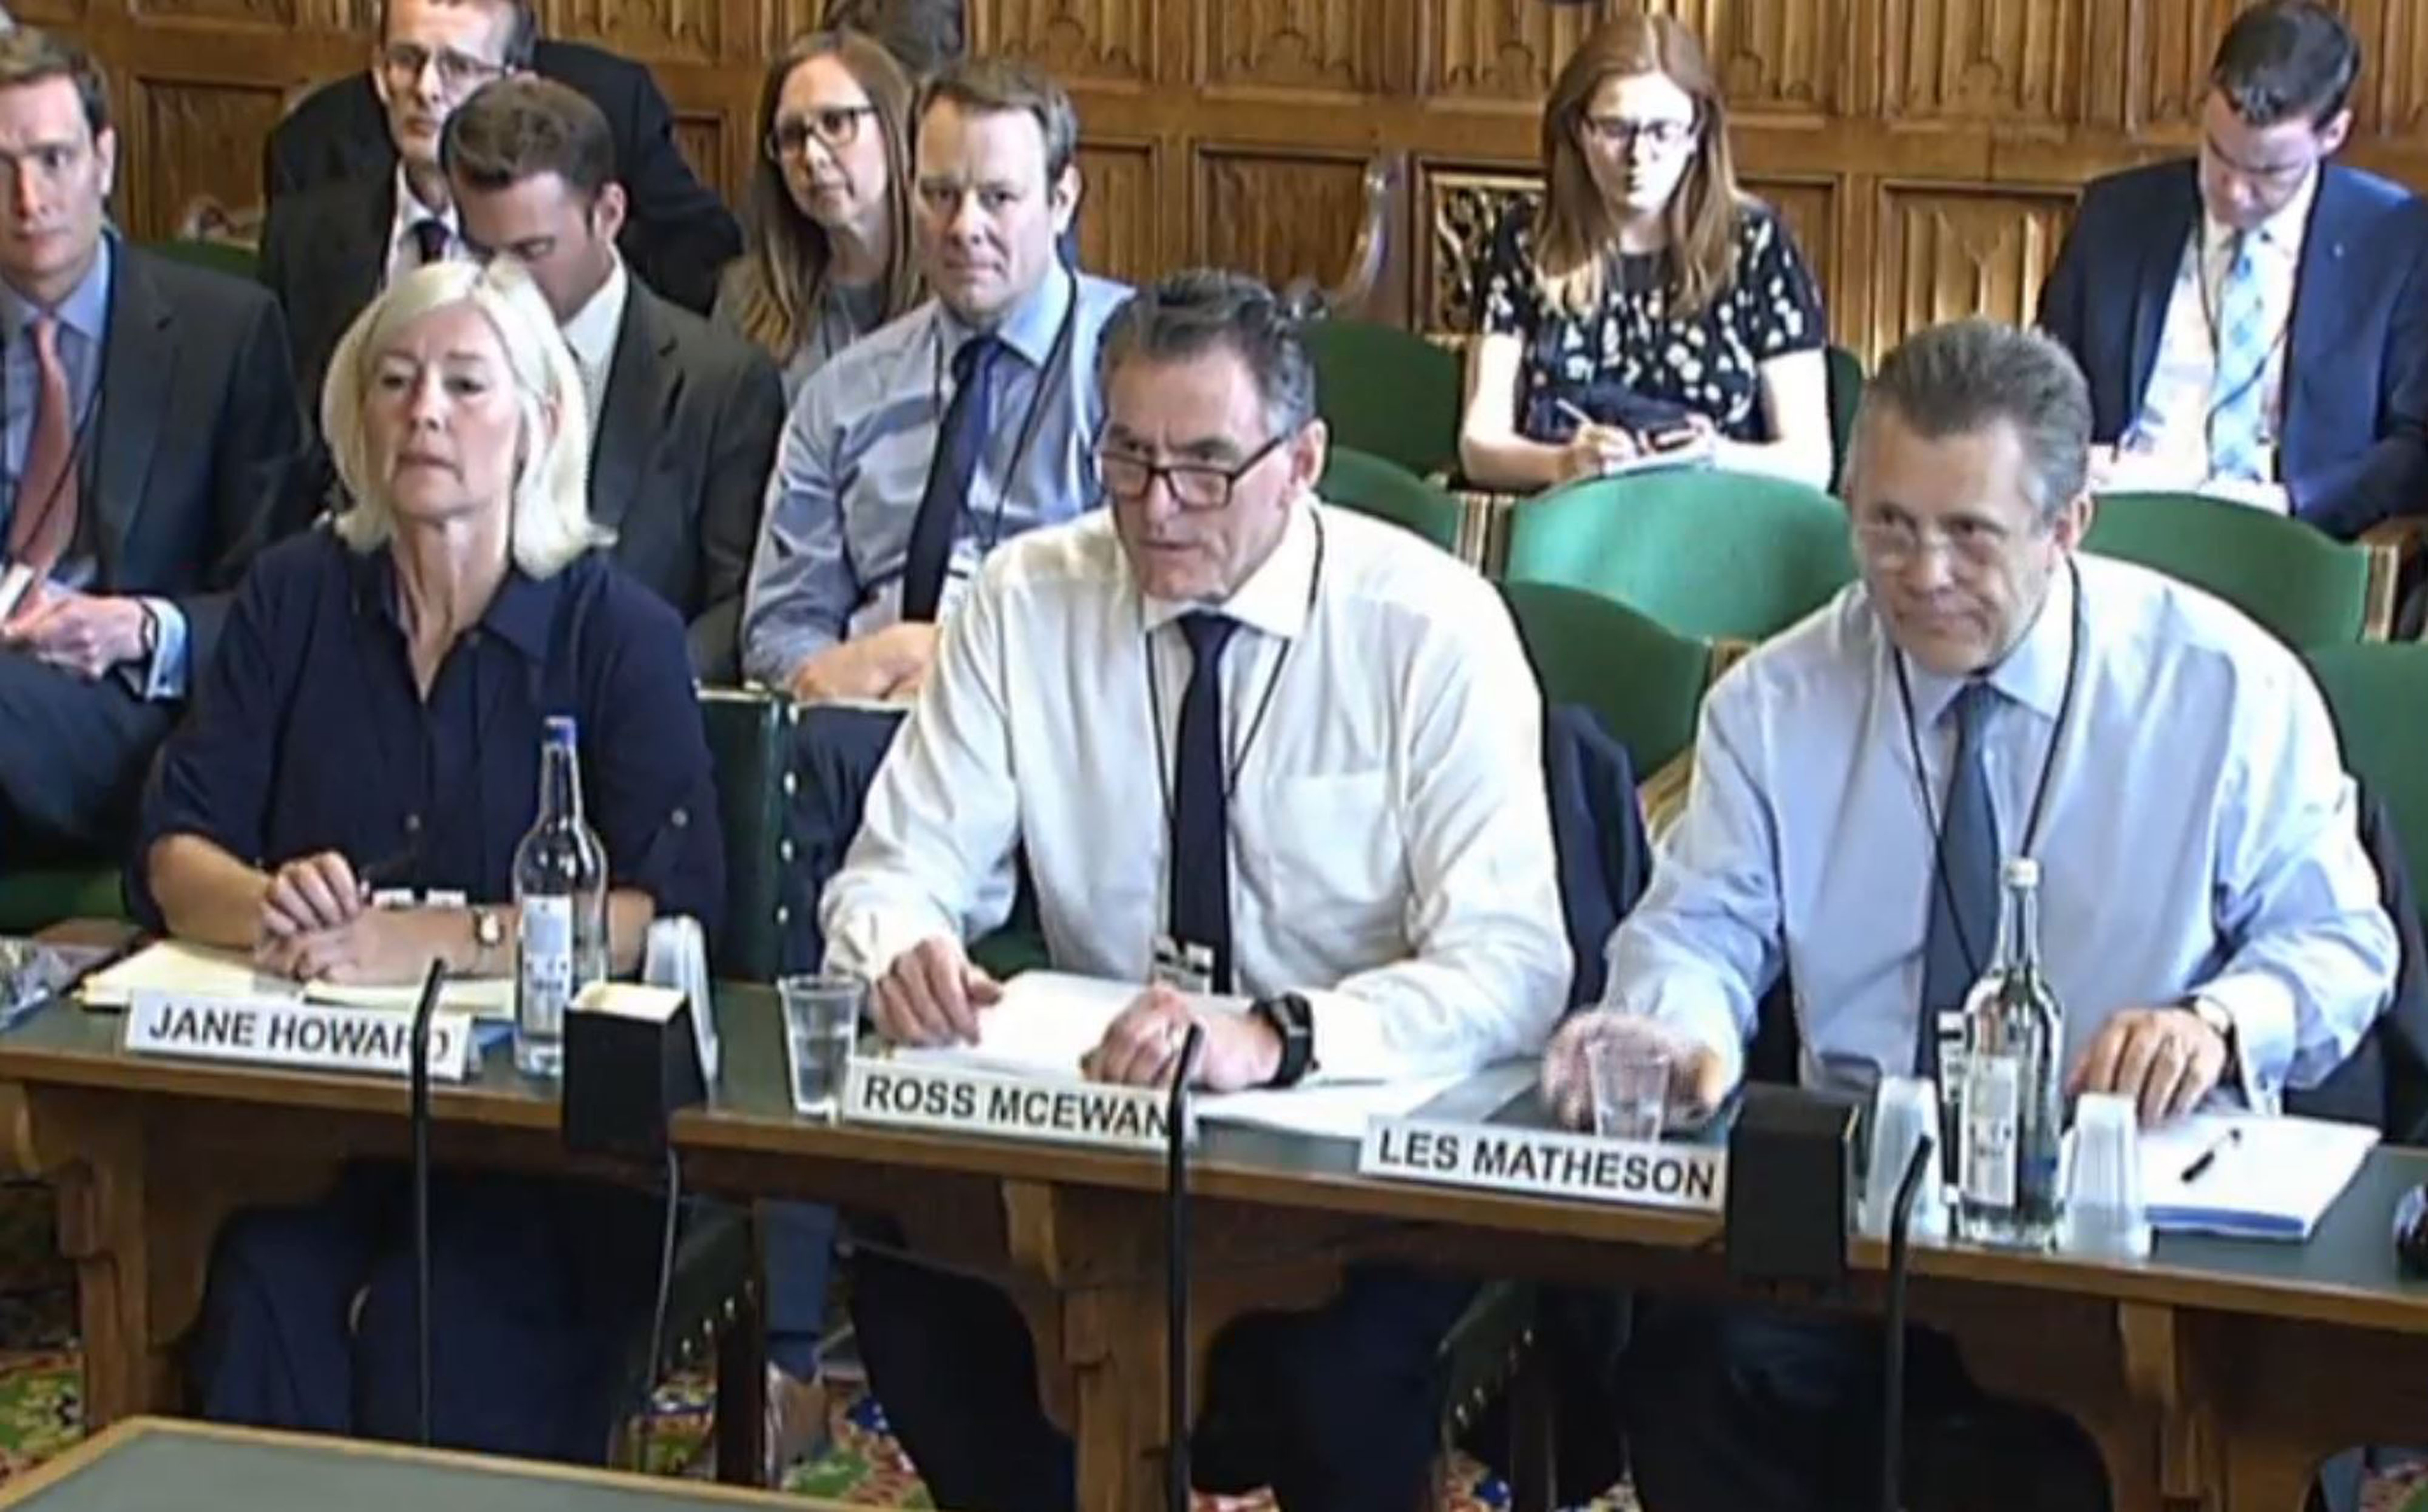 Jane Howard, RBS Managing Director, Personal Banking, Ross McEwan, RBS Chief Executive and Les Matheson RBS Chief Executive, Personal & Business Banking, giving evidence to the Scottish Affairs Committee on the banks plans to close more than 50 branches in Scotland.